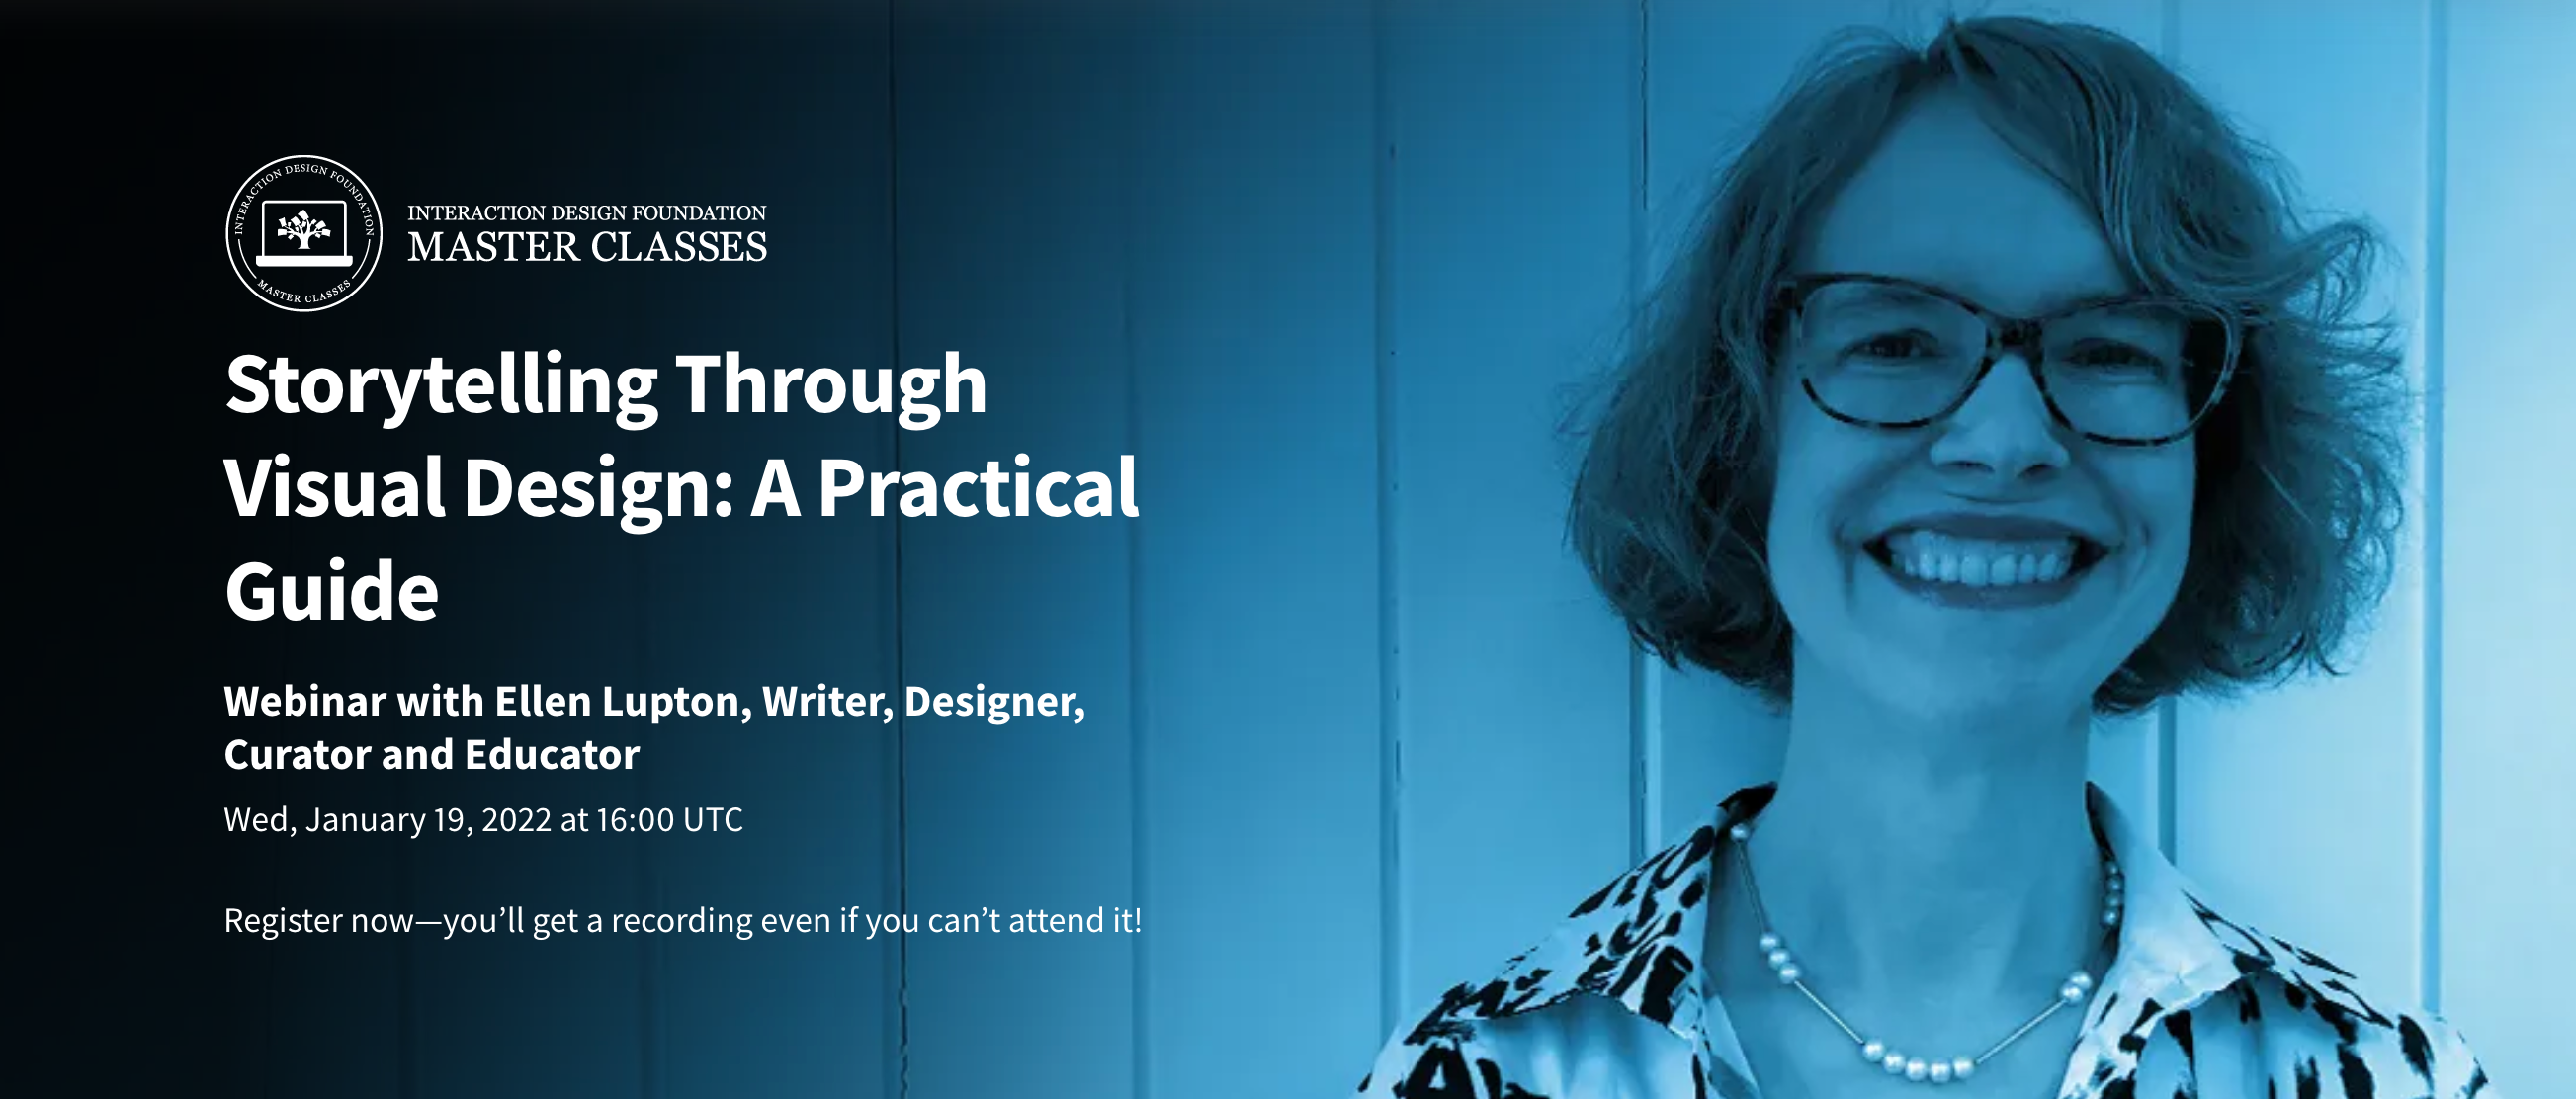 Storytelling Through Visual Design: A Practical Guide. Webinar with Ellen Lupton, Writer, Designer, Curator and Educator. Wed, January 19, 2022 at 16:00 UTC. Register now — you’ll get a recording even if you can’t attend it!